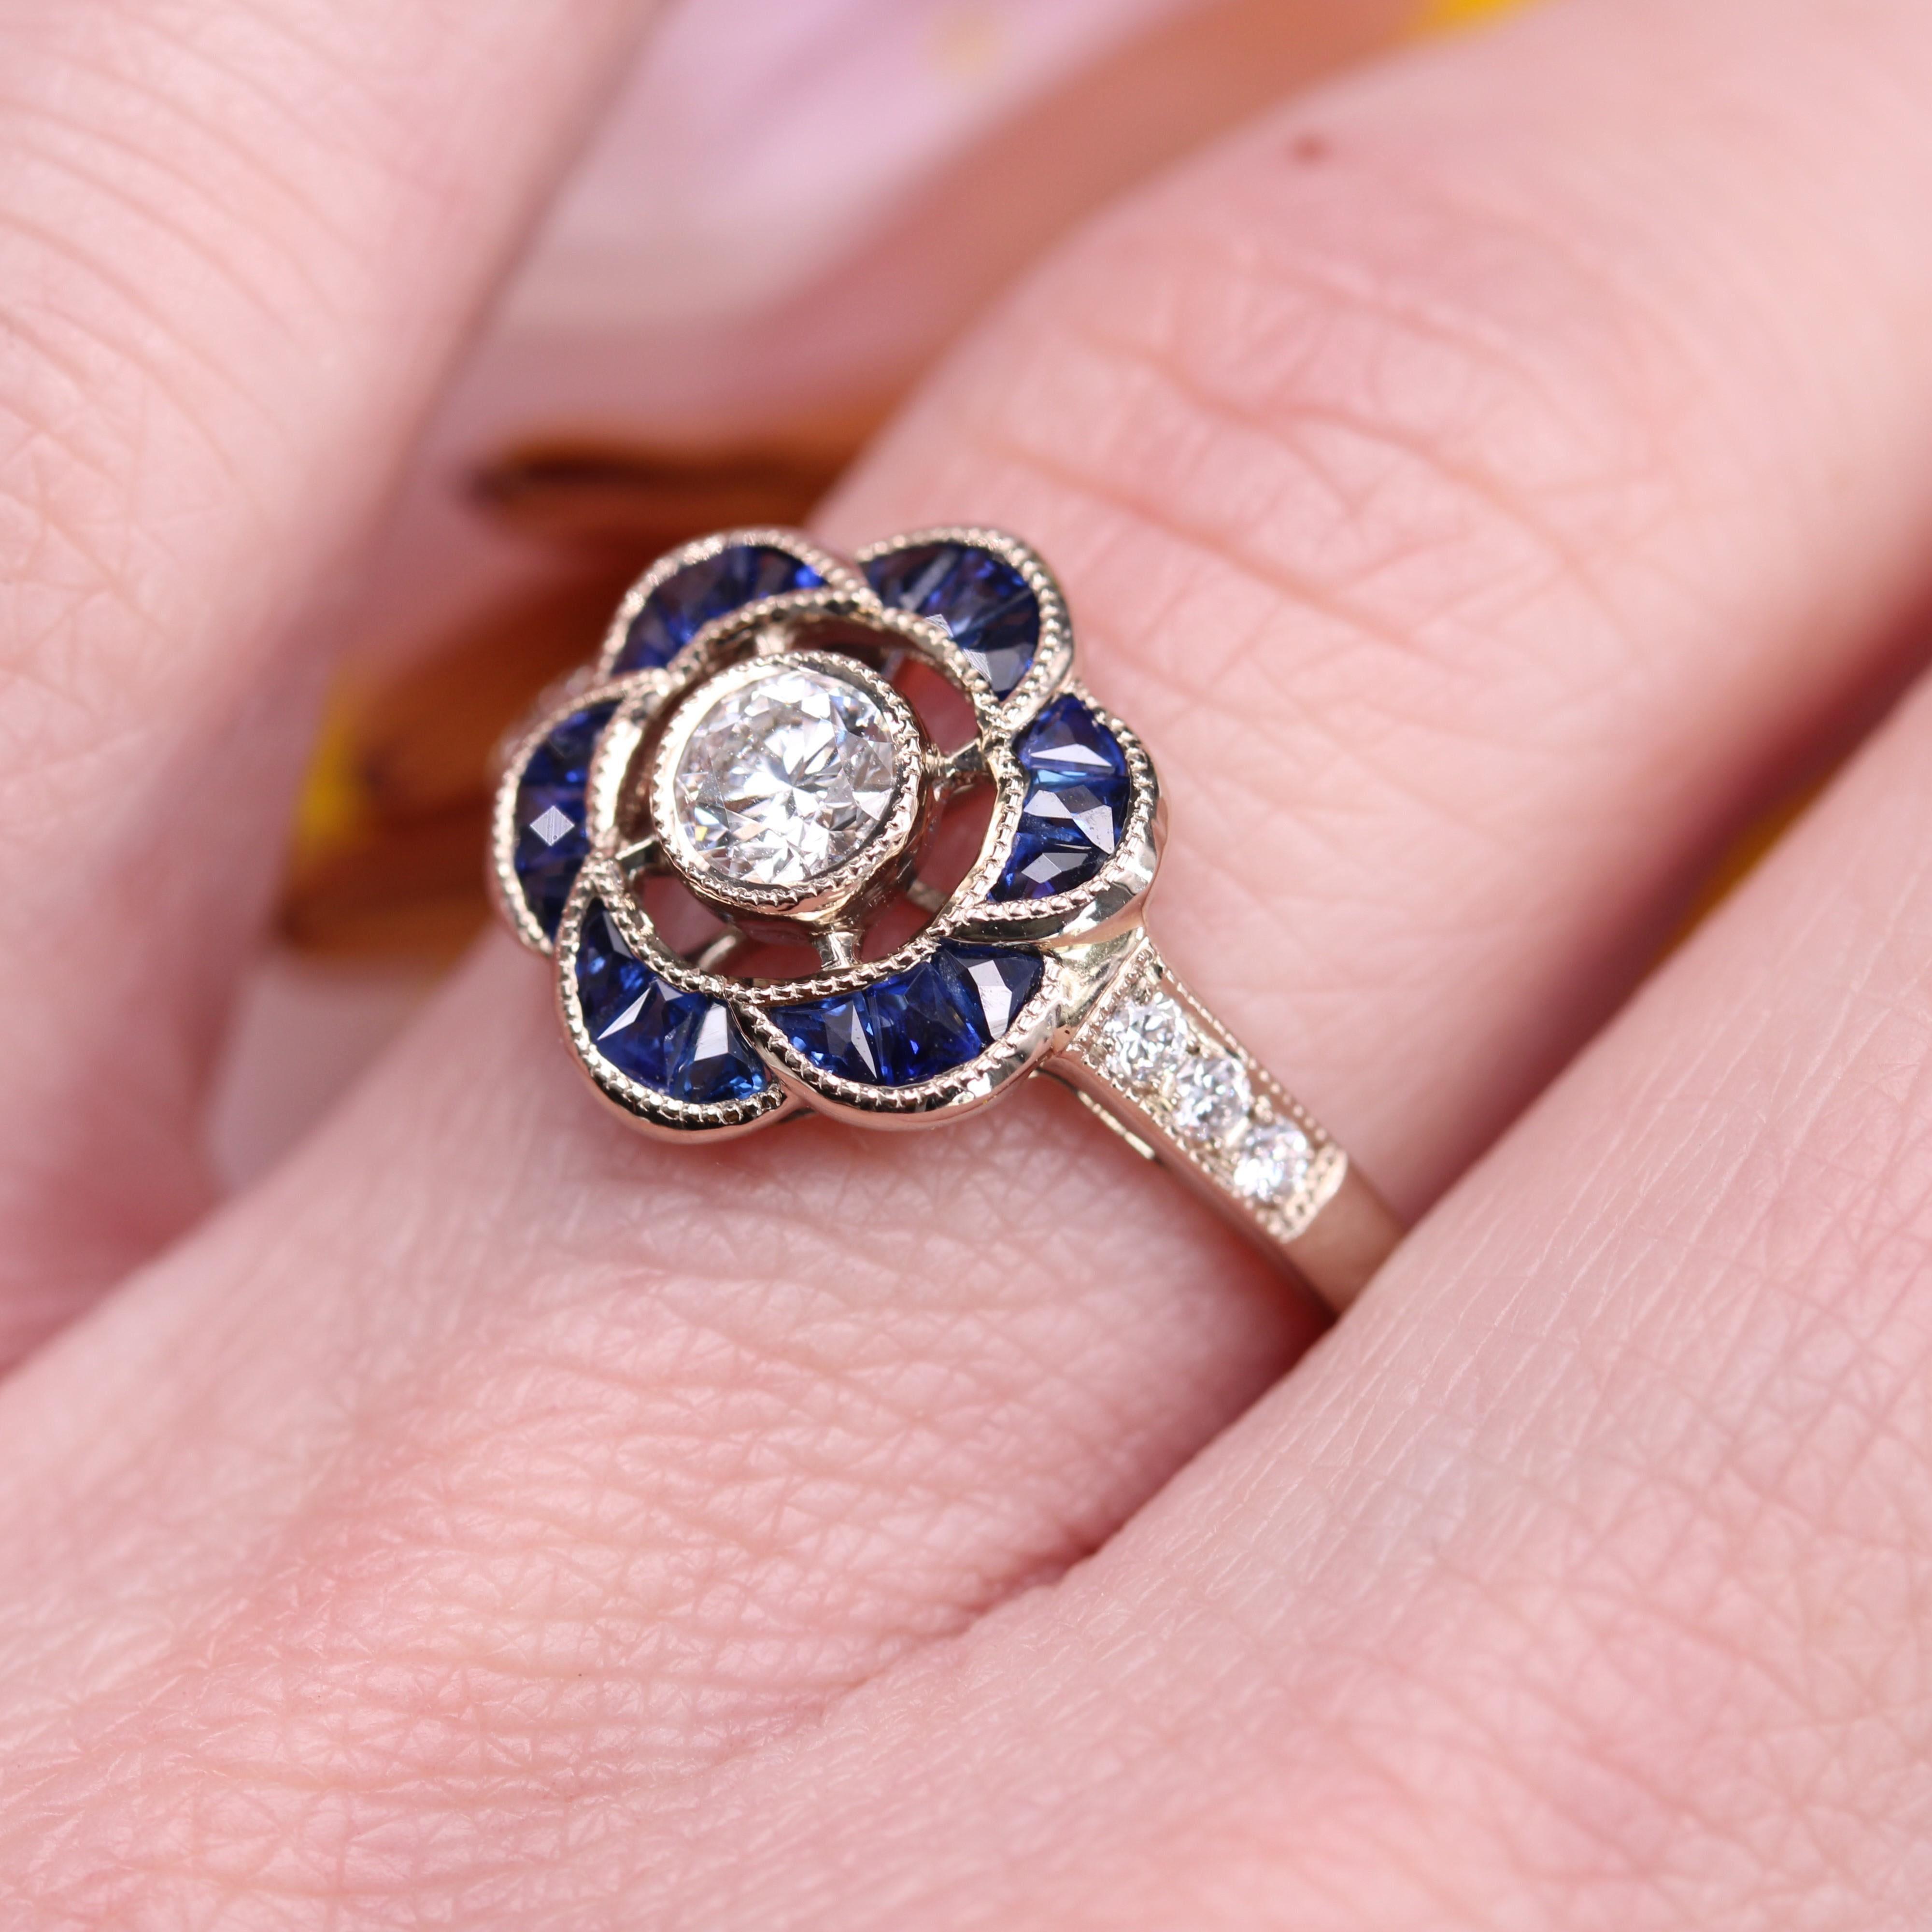 New Art Deco Style Calibrated Sapphires Diamonds 18 K White Gold Flower Ring For Sale 8